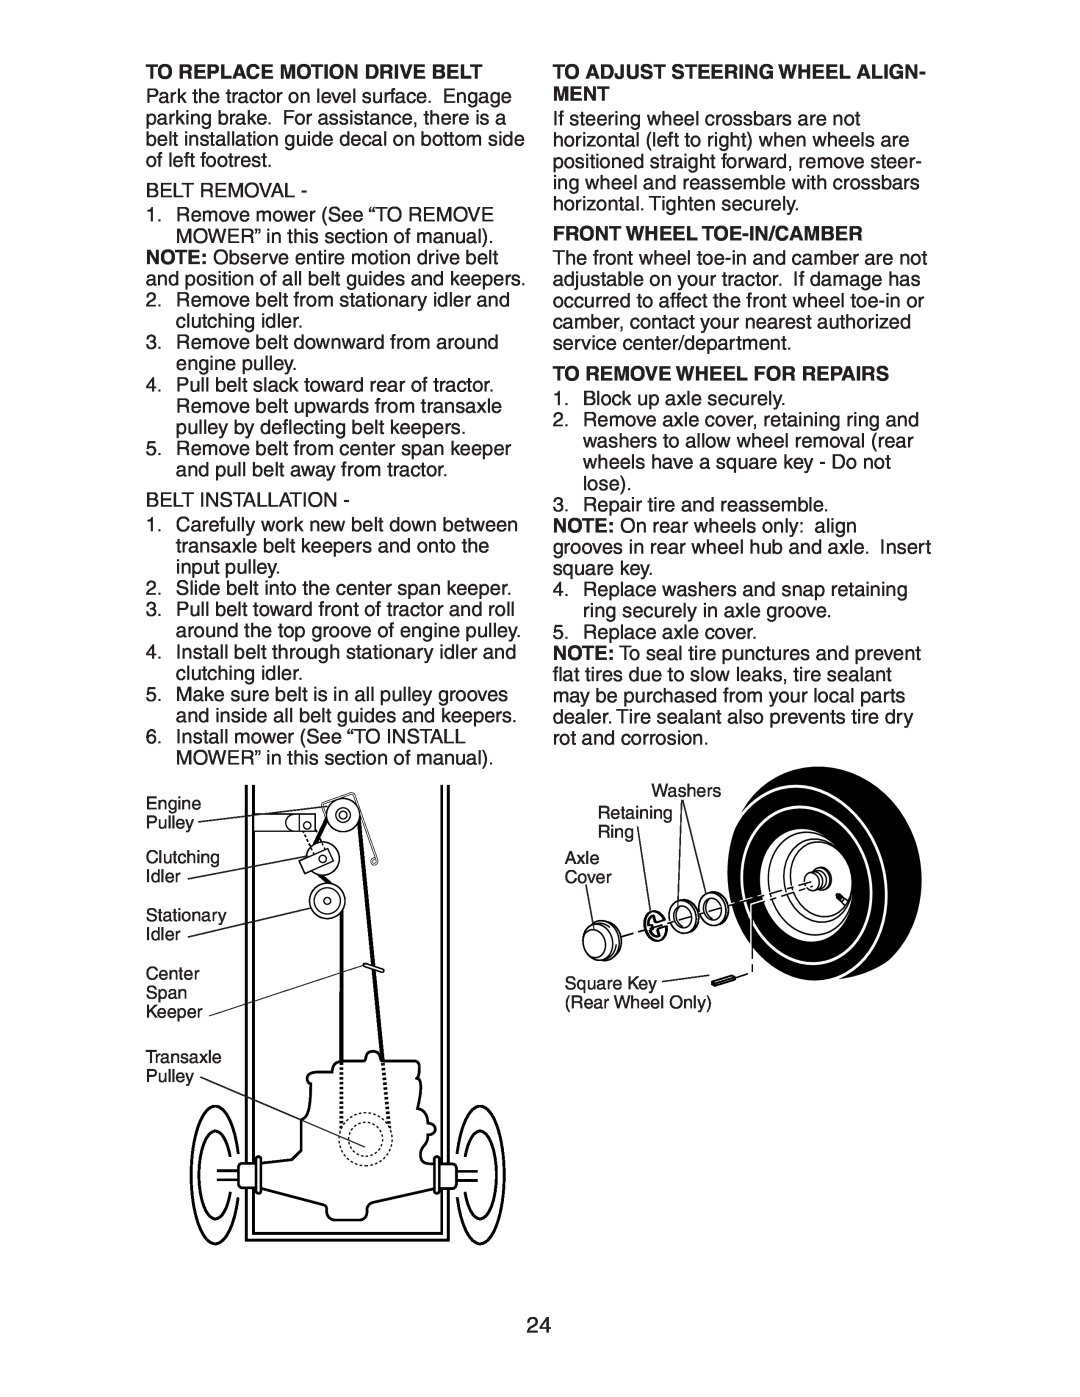 Electrolux AG15538A manual To Replace Motion Drive Belt, To Adjust Steering Wheel Align- Ment, Front Wheel Toe-In/Camber 